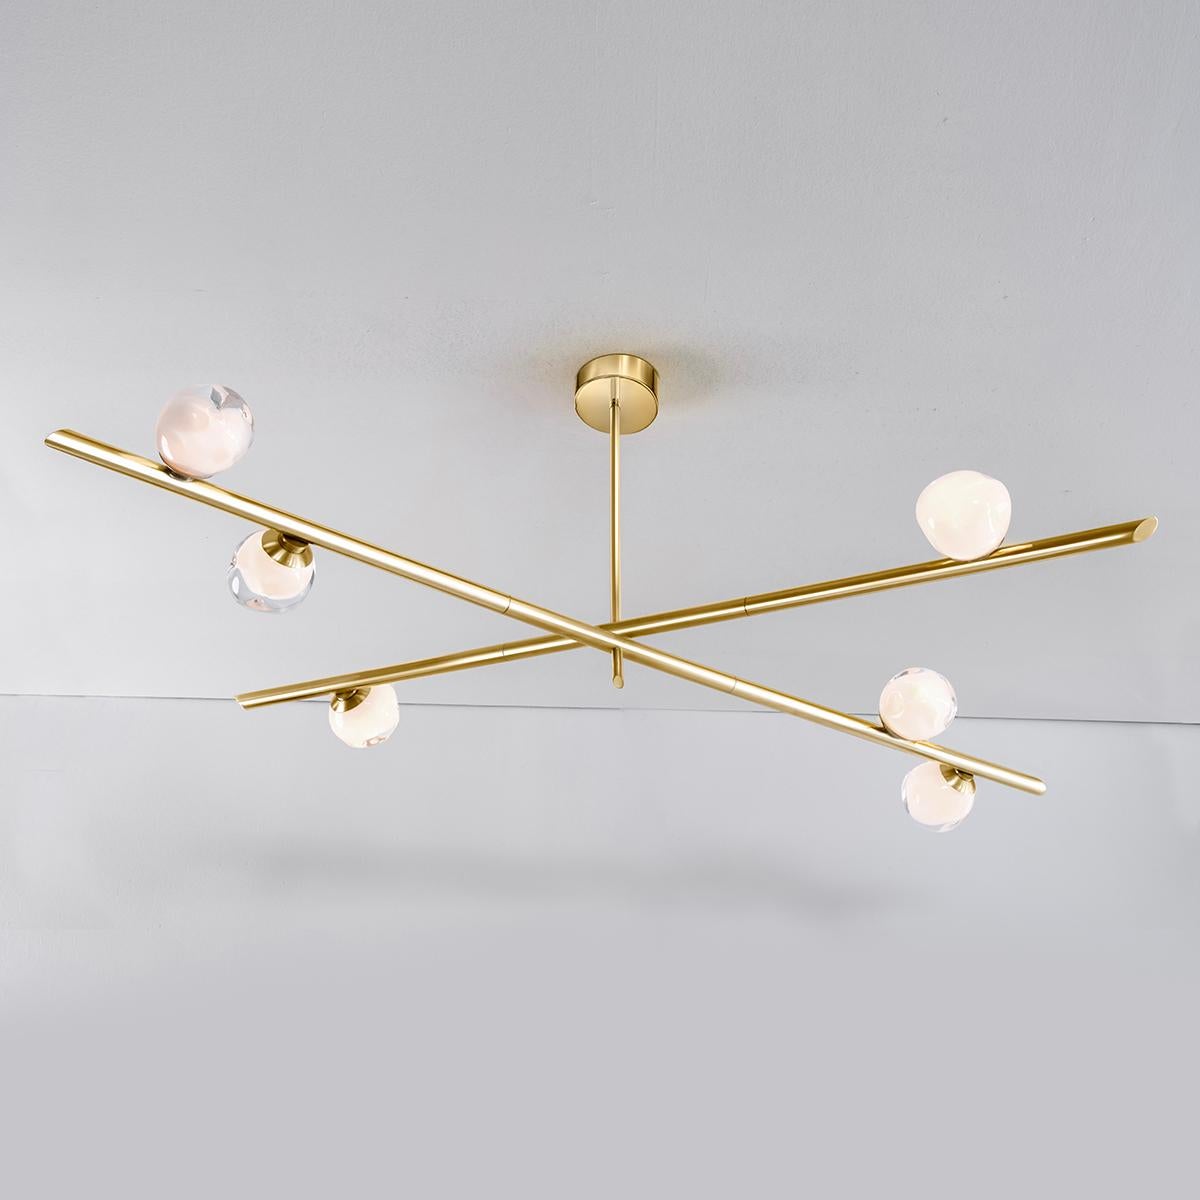 The Antares ceiling light harmoniously balances the linear details of its intersecting arms with the organic form of its handblown glass shades. The first image shows the fixture in polished brass-subsequent pictures are in the standard satin brass.